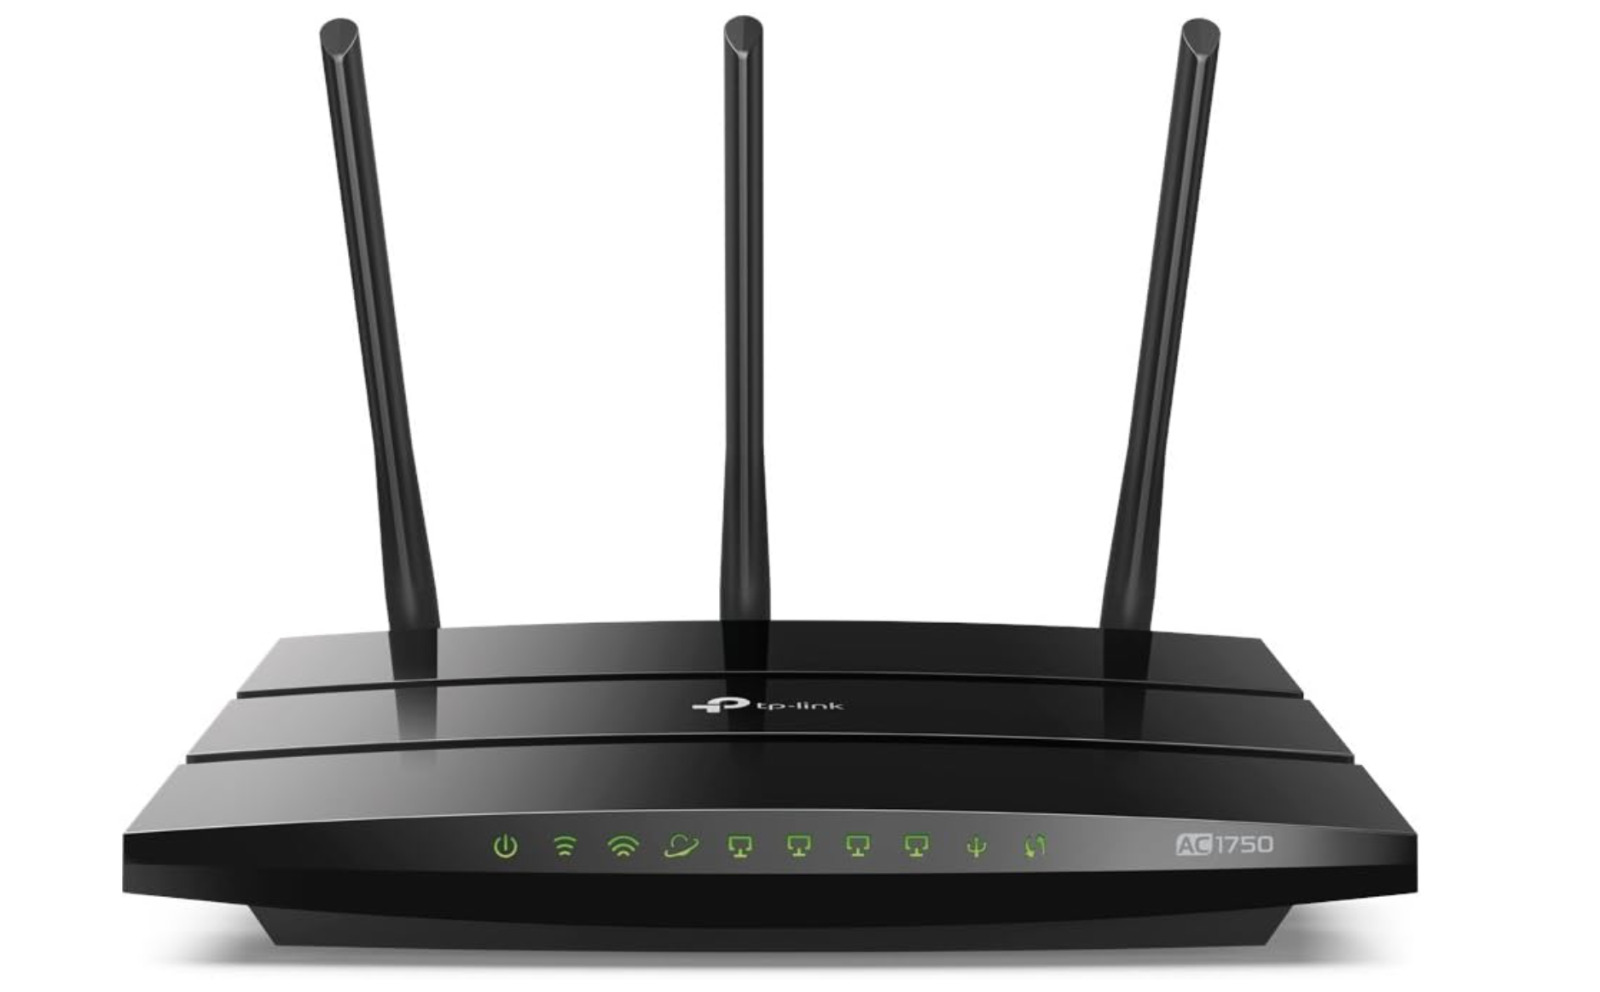 TP-Link AC1750 OneMesh Wi-Fi Repeater/Router, Dual Band, Gigabit Ports